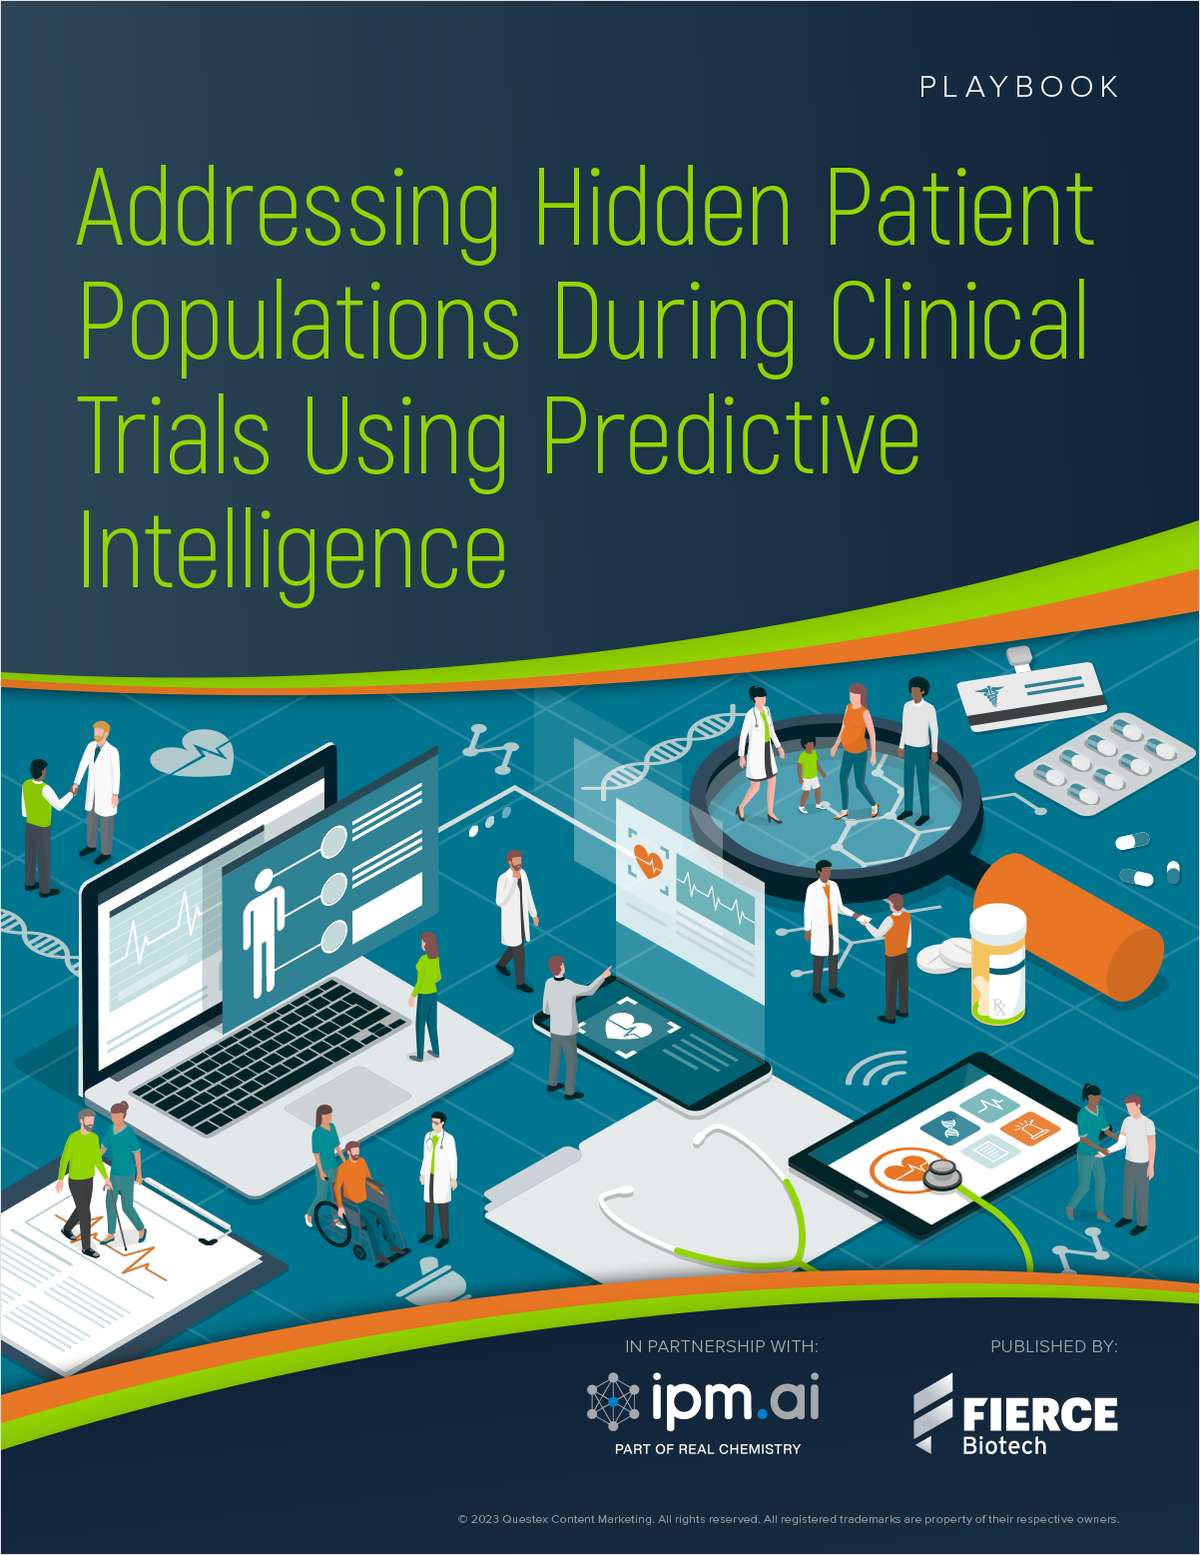 Addressing Hidden Patient Populations During Clinical Trials Using Predictive Intelligence